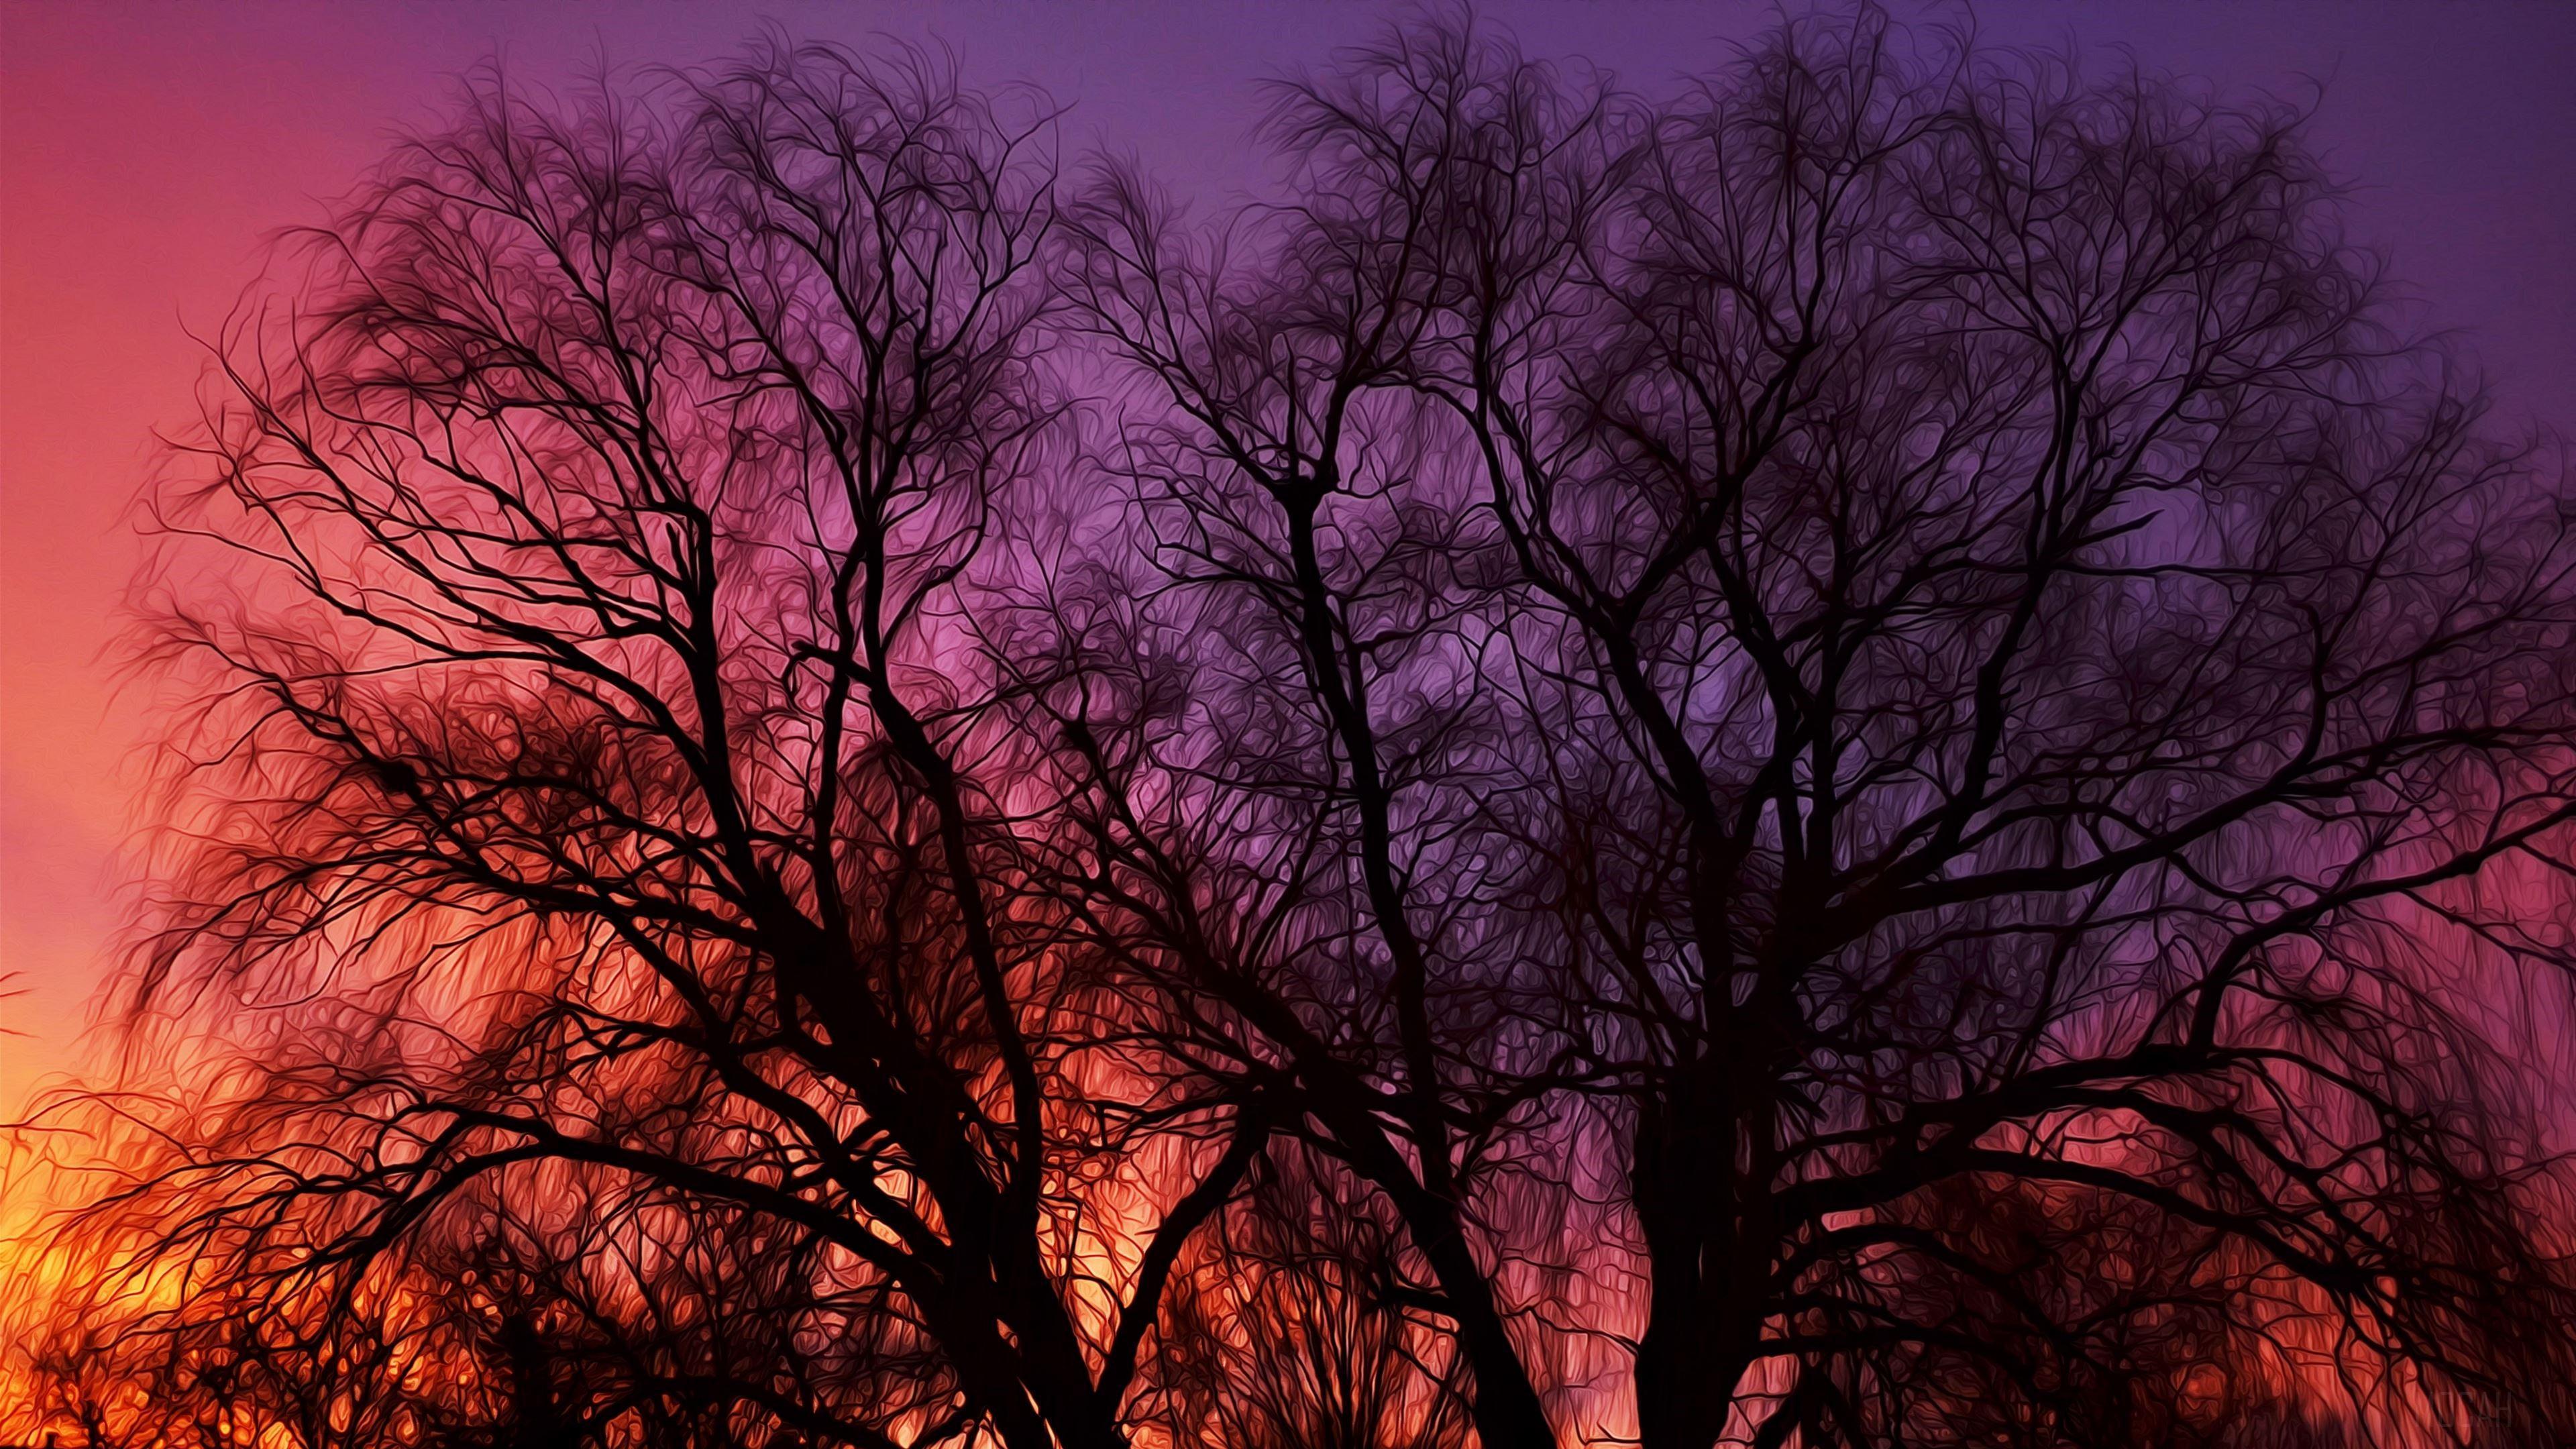 HD wallpaper, Artistic, Tree 4K, Silhouette, Sky, Painting, Pink, Sunset, Oil Painting, Branch, Purple